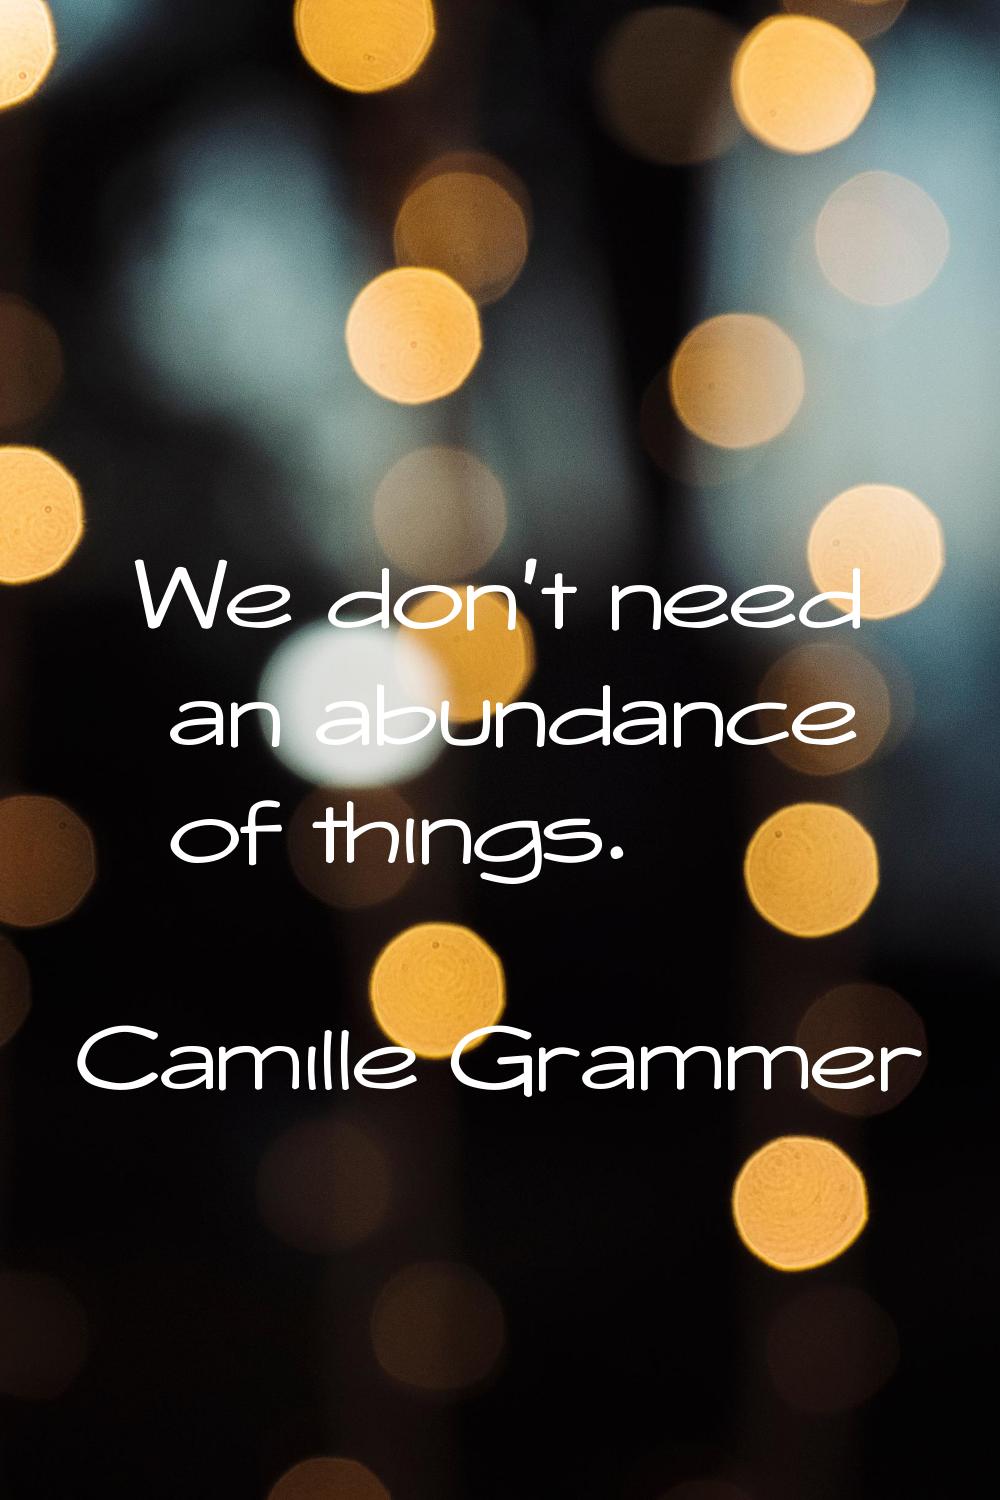 We don't need an abundance of things.